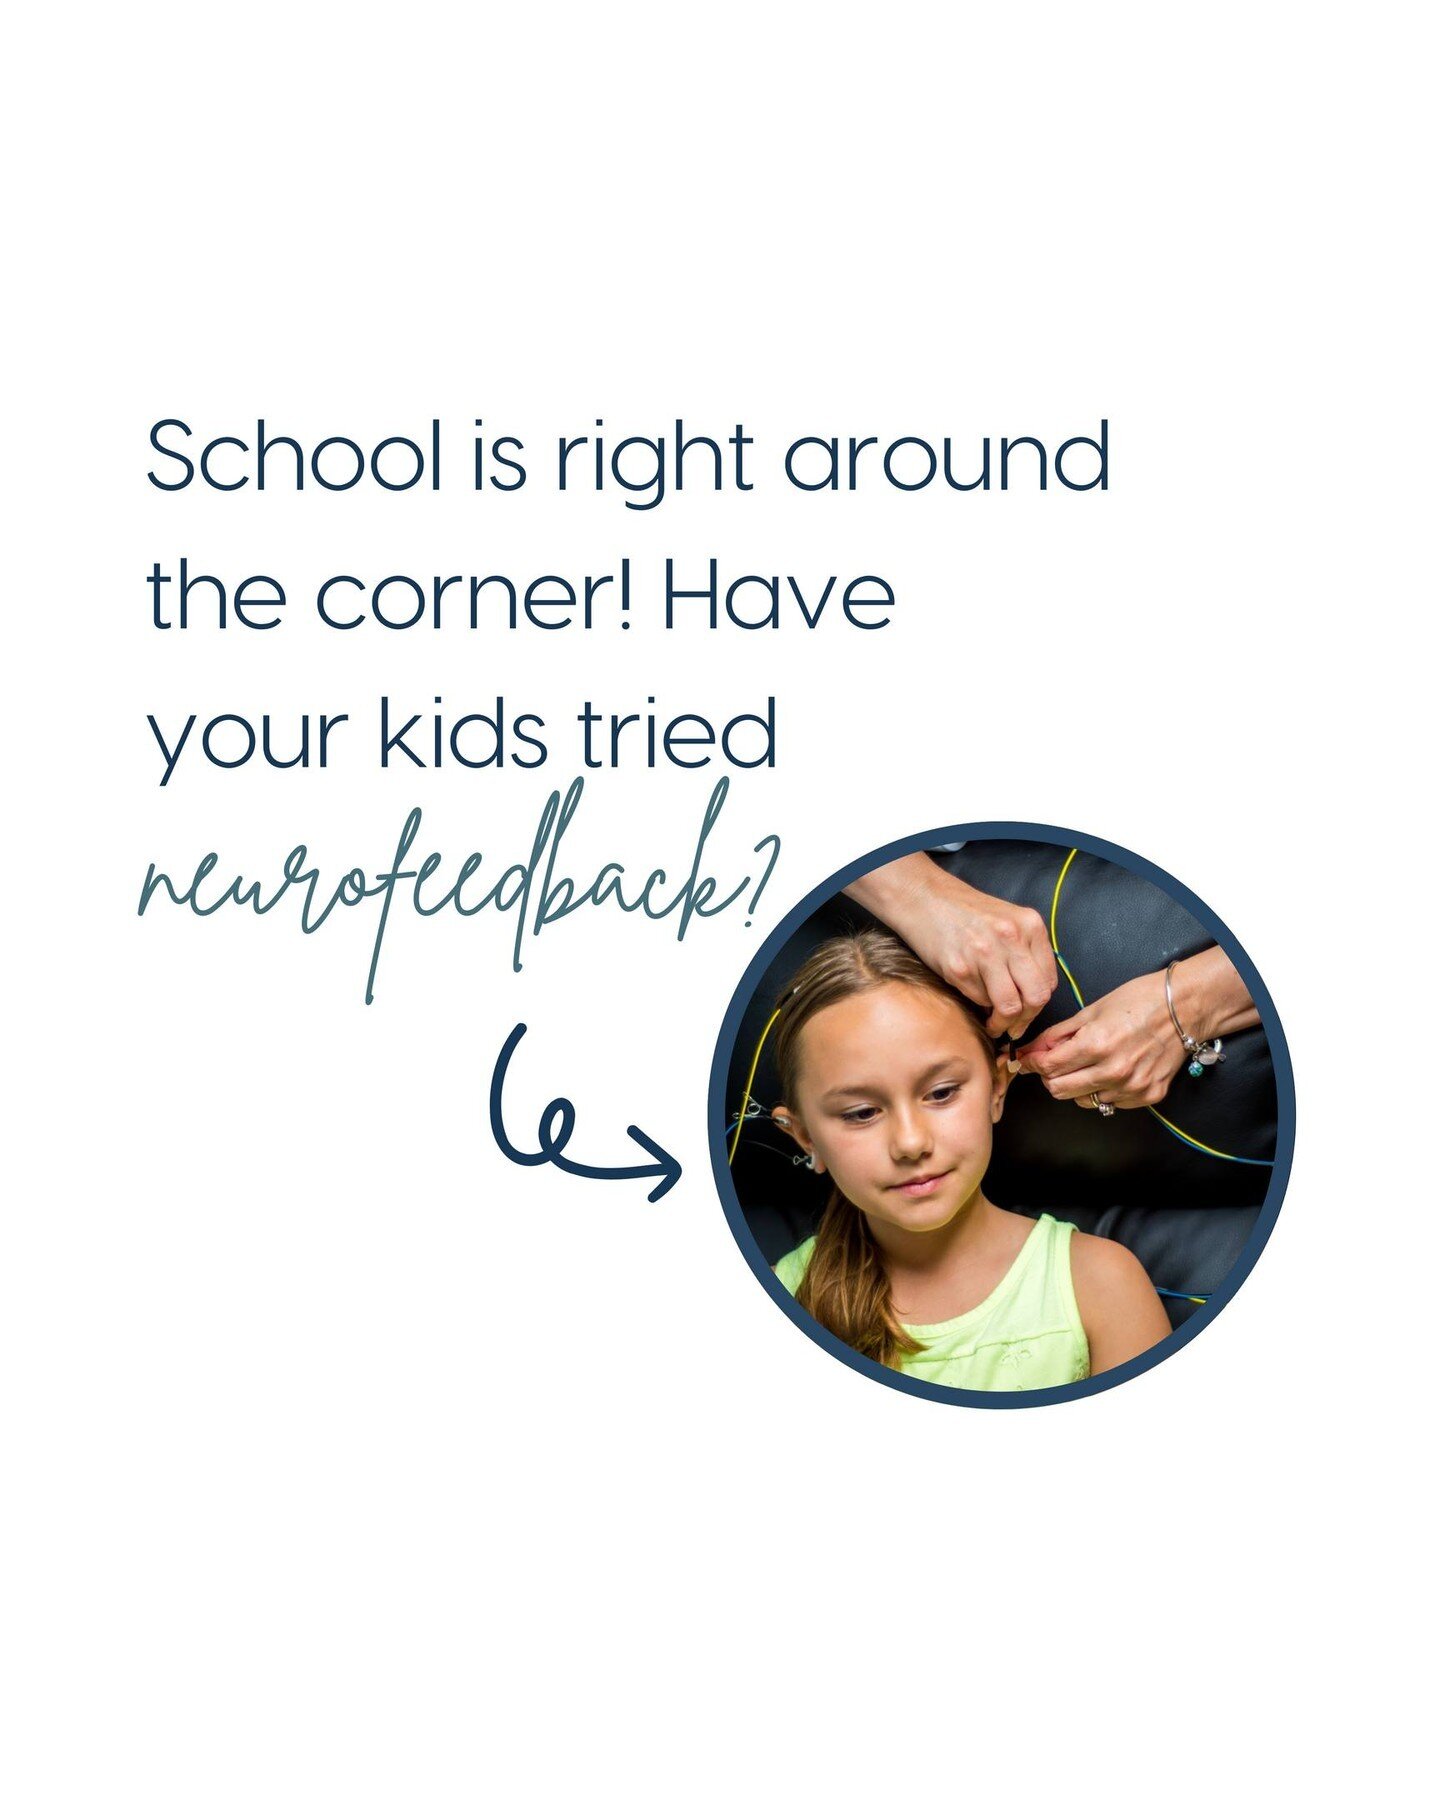 School is starting soon! ⁠
⁠
Have you ever tried neurofeedback for your child?⁠
⁠
Neurofeedback is a form of brain training. It's a safe and effective way that may help them become more focused and organized in the classroom, which can help them succ